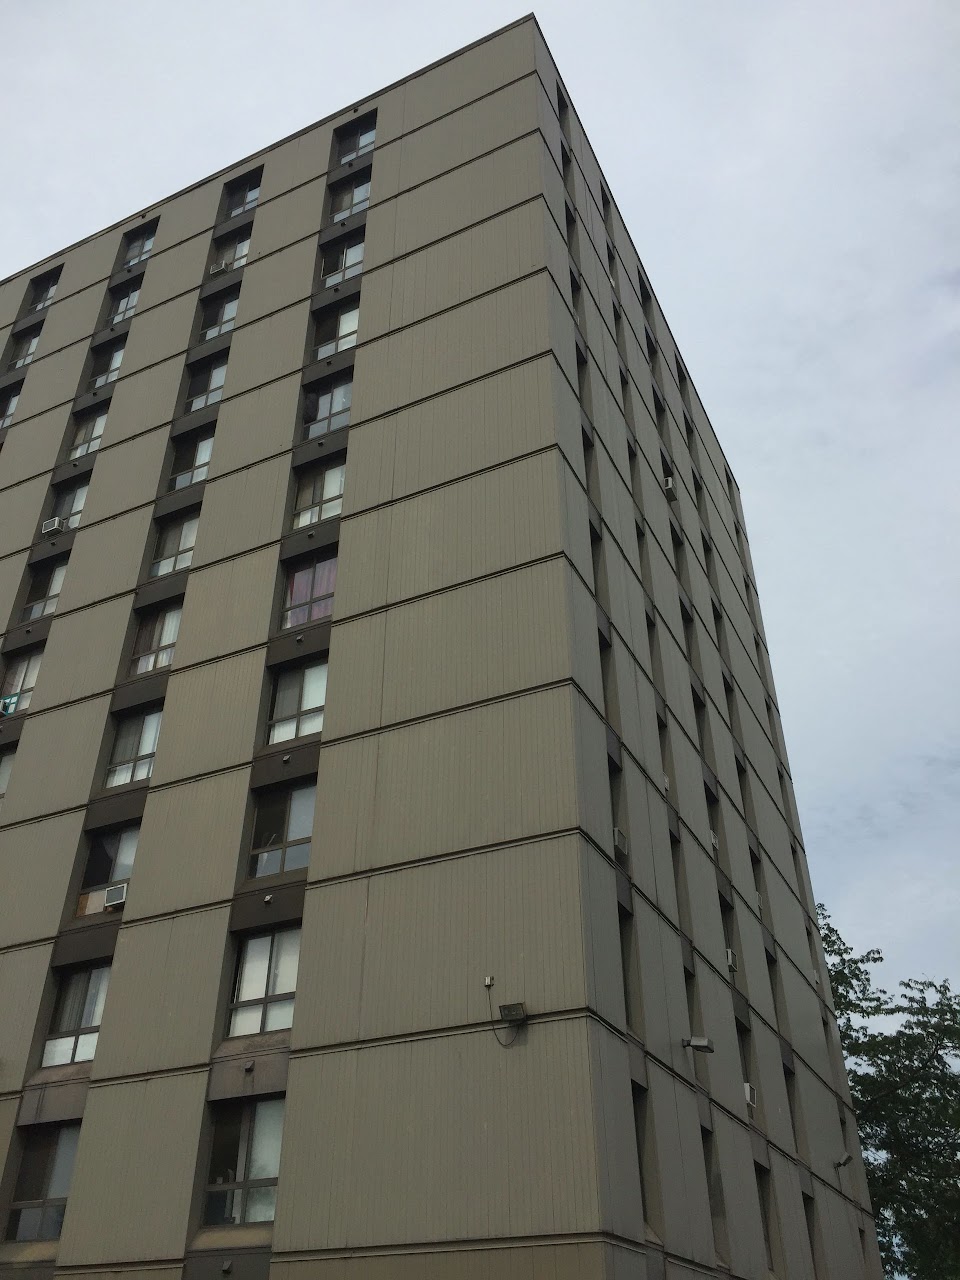 Photo of CENTRAL TOWERS APARTMENTS. Affordable housing located at 2520 CENTRAL AVENUE DETROIT, MI 48209